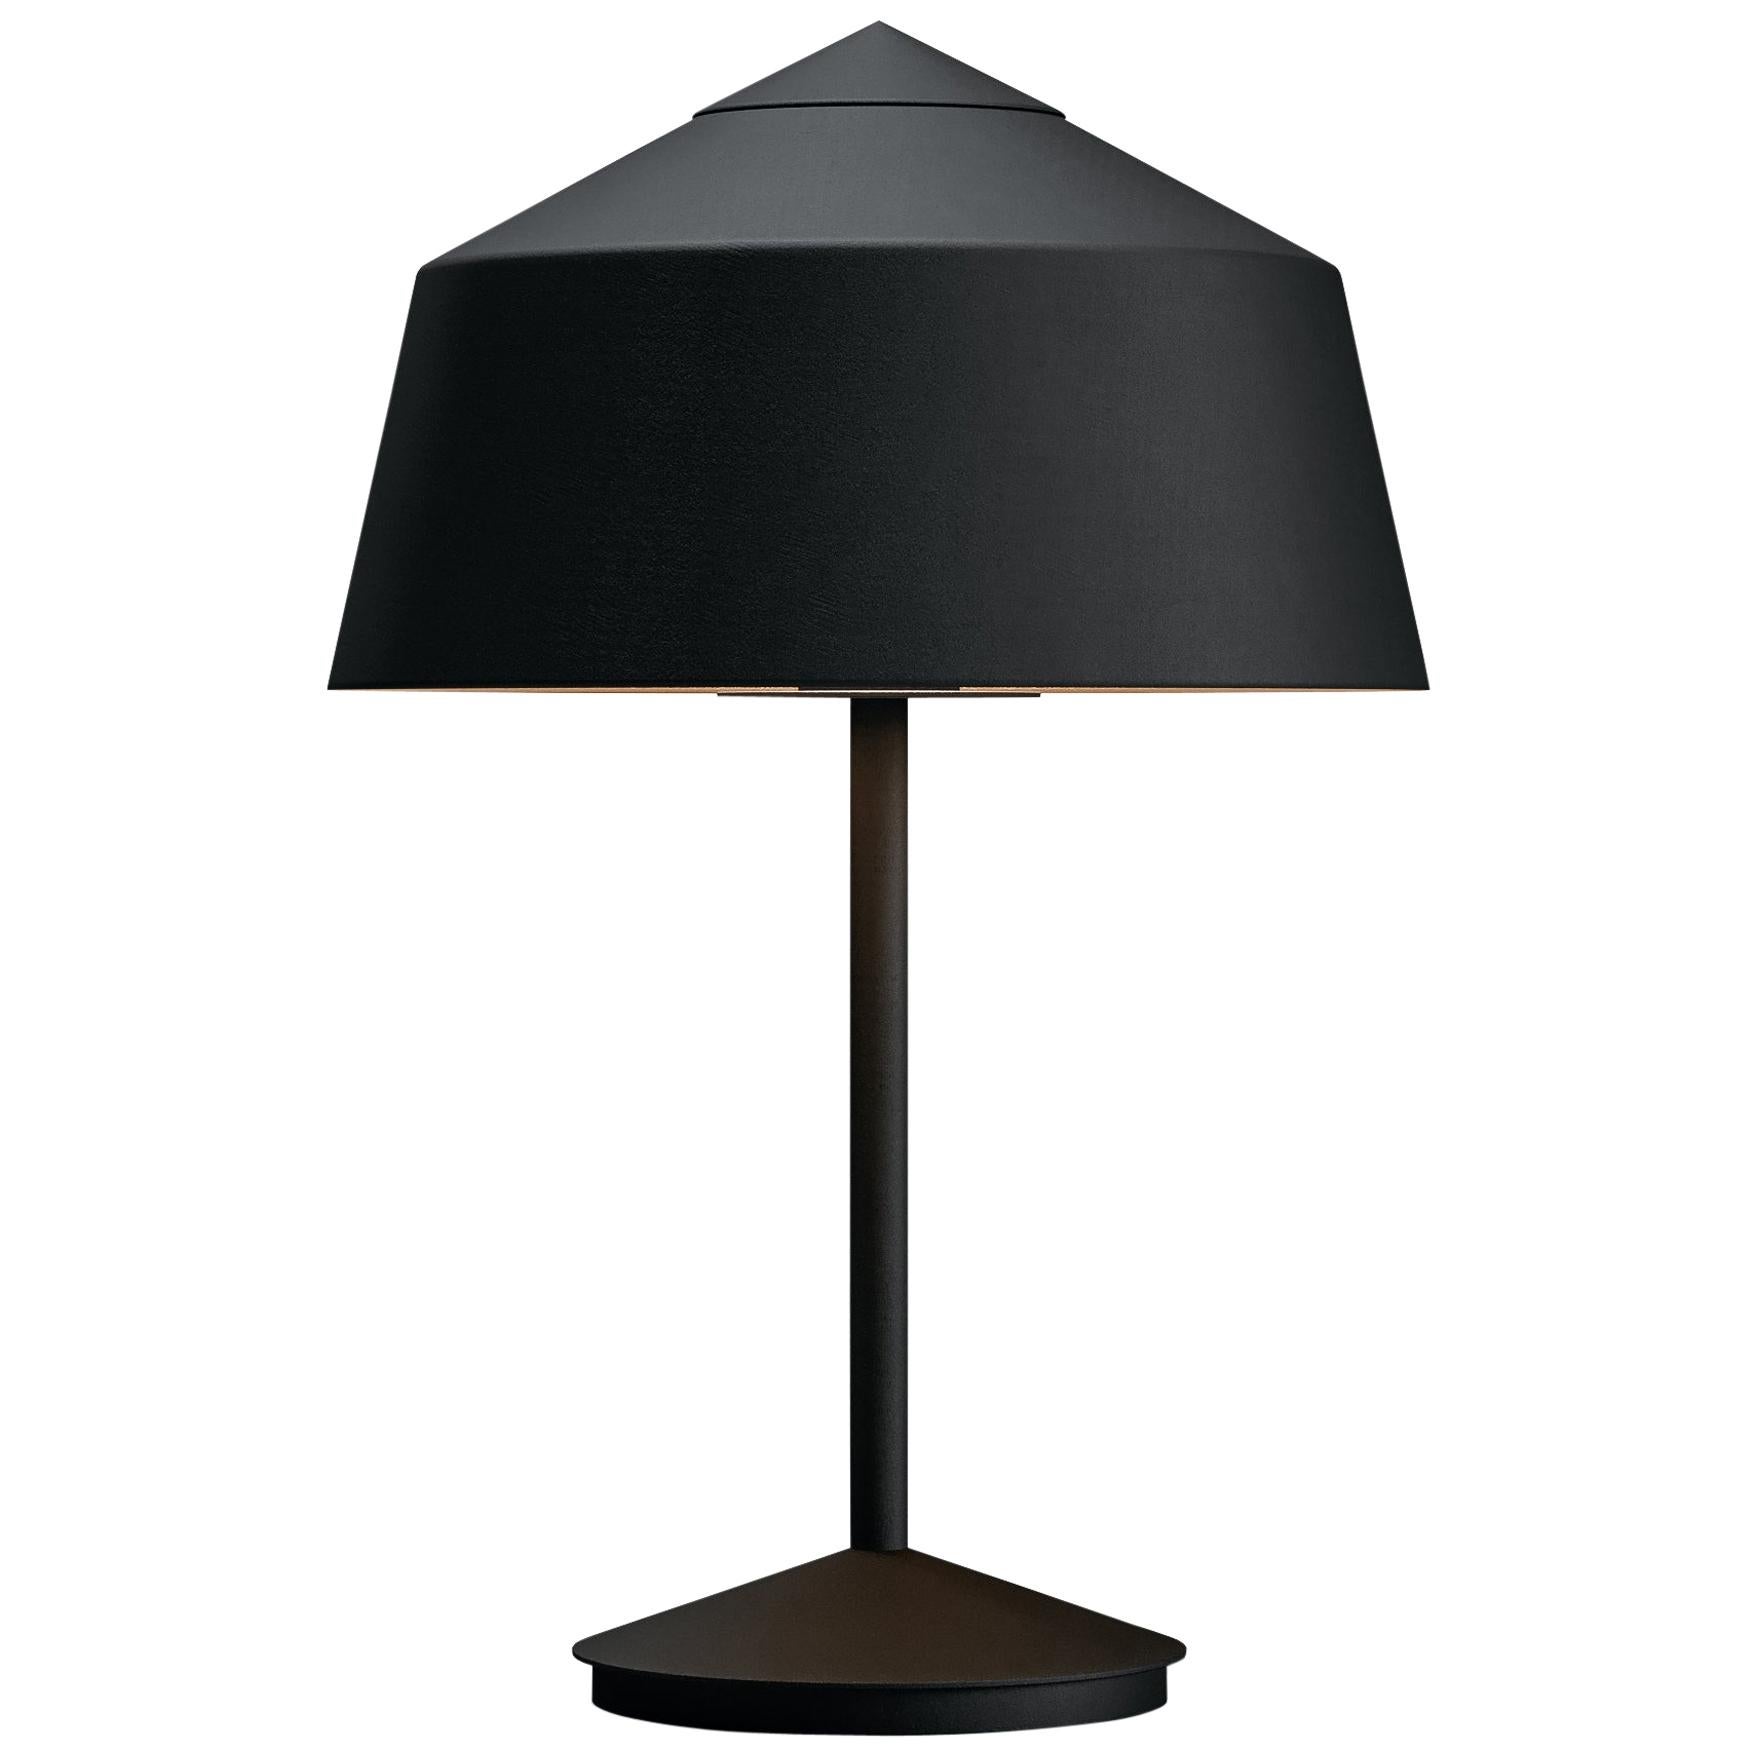 Circus Table Lamp Designed by Corinna Warm for Warm In Black/Bronze  For Sale